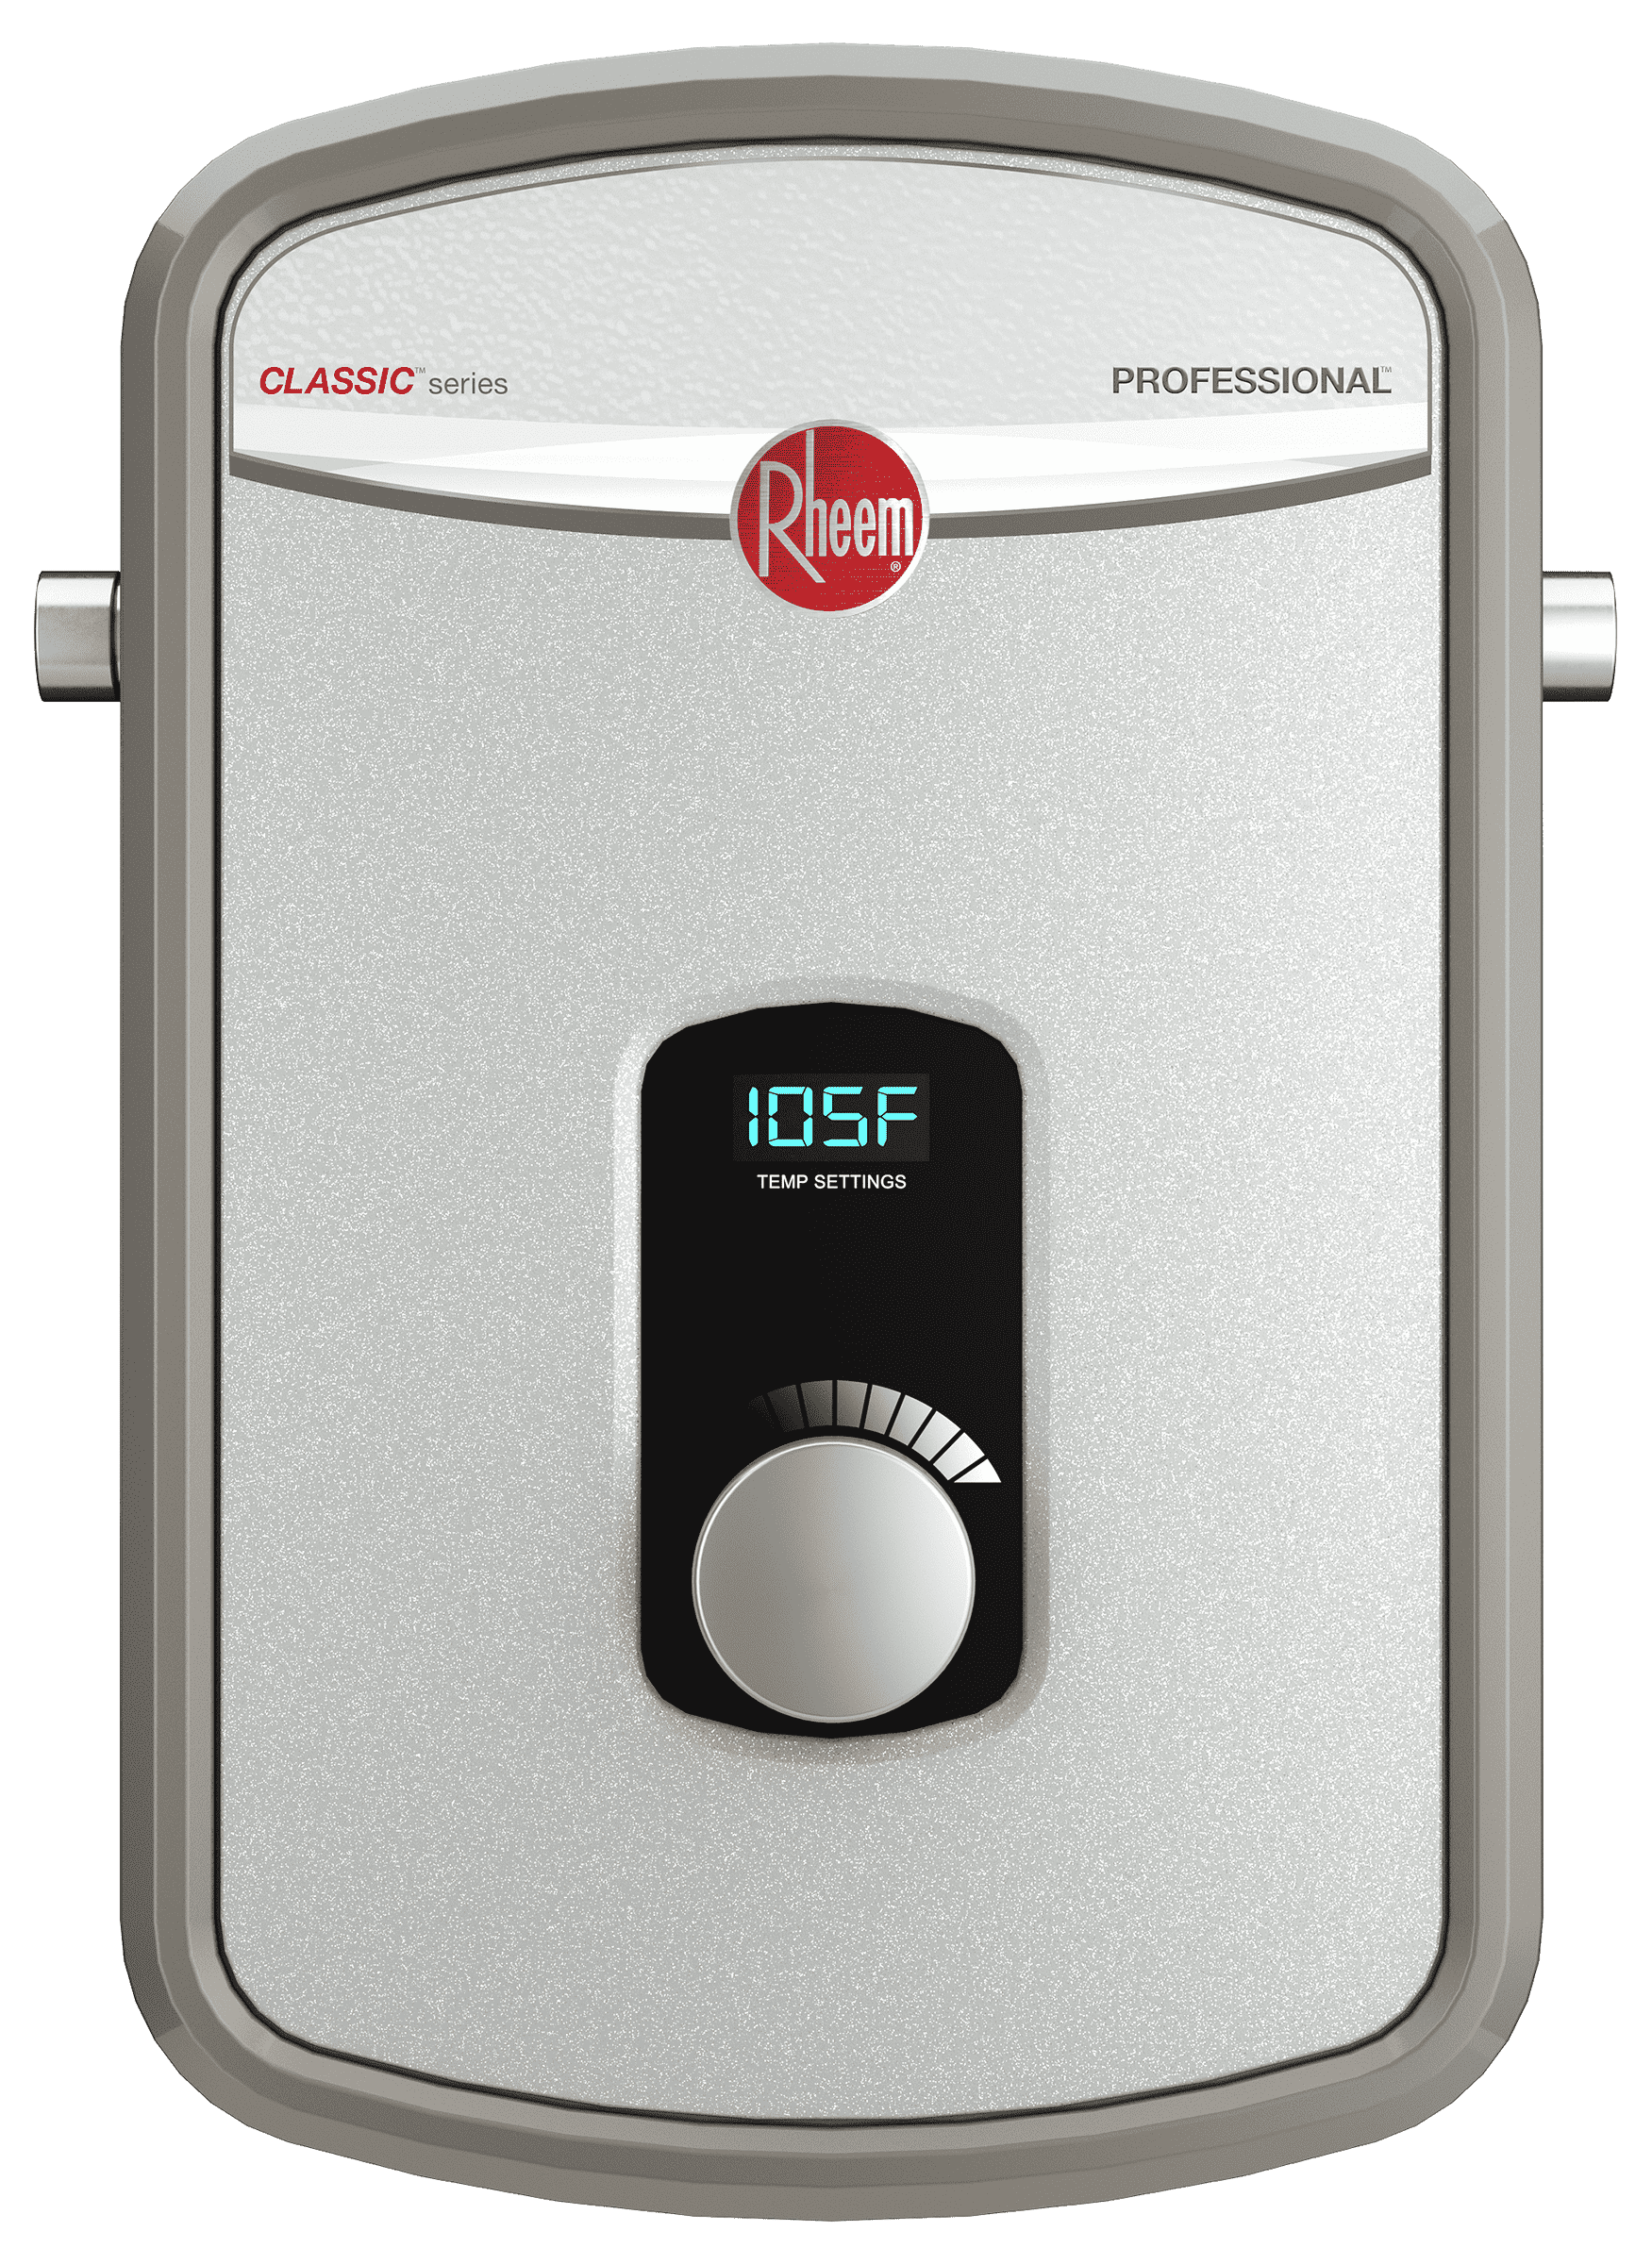 Tankless Water Heater Electric 18KW 240 Volt, on Demand Instant Endless Hot Water Heater, Digital Temperature Display Easy Installation, for